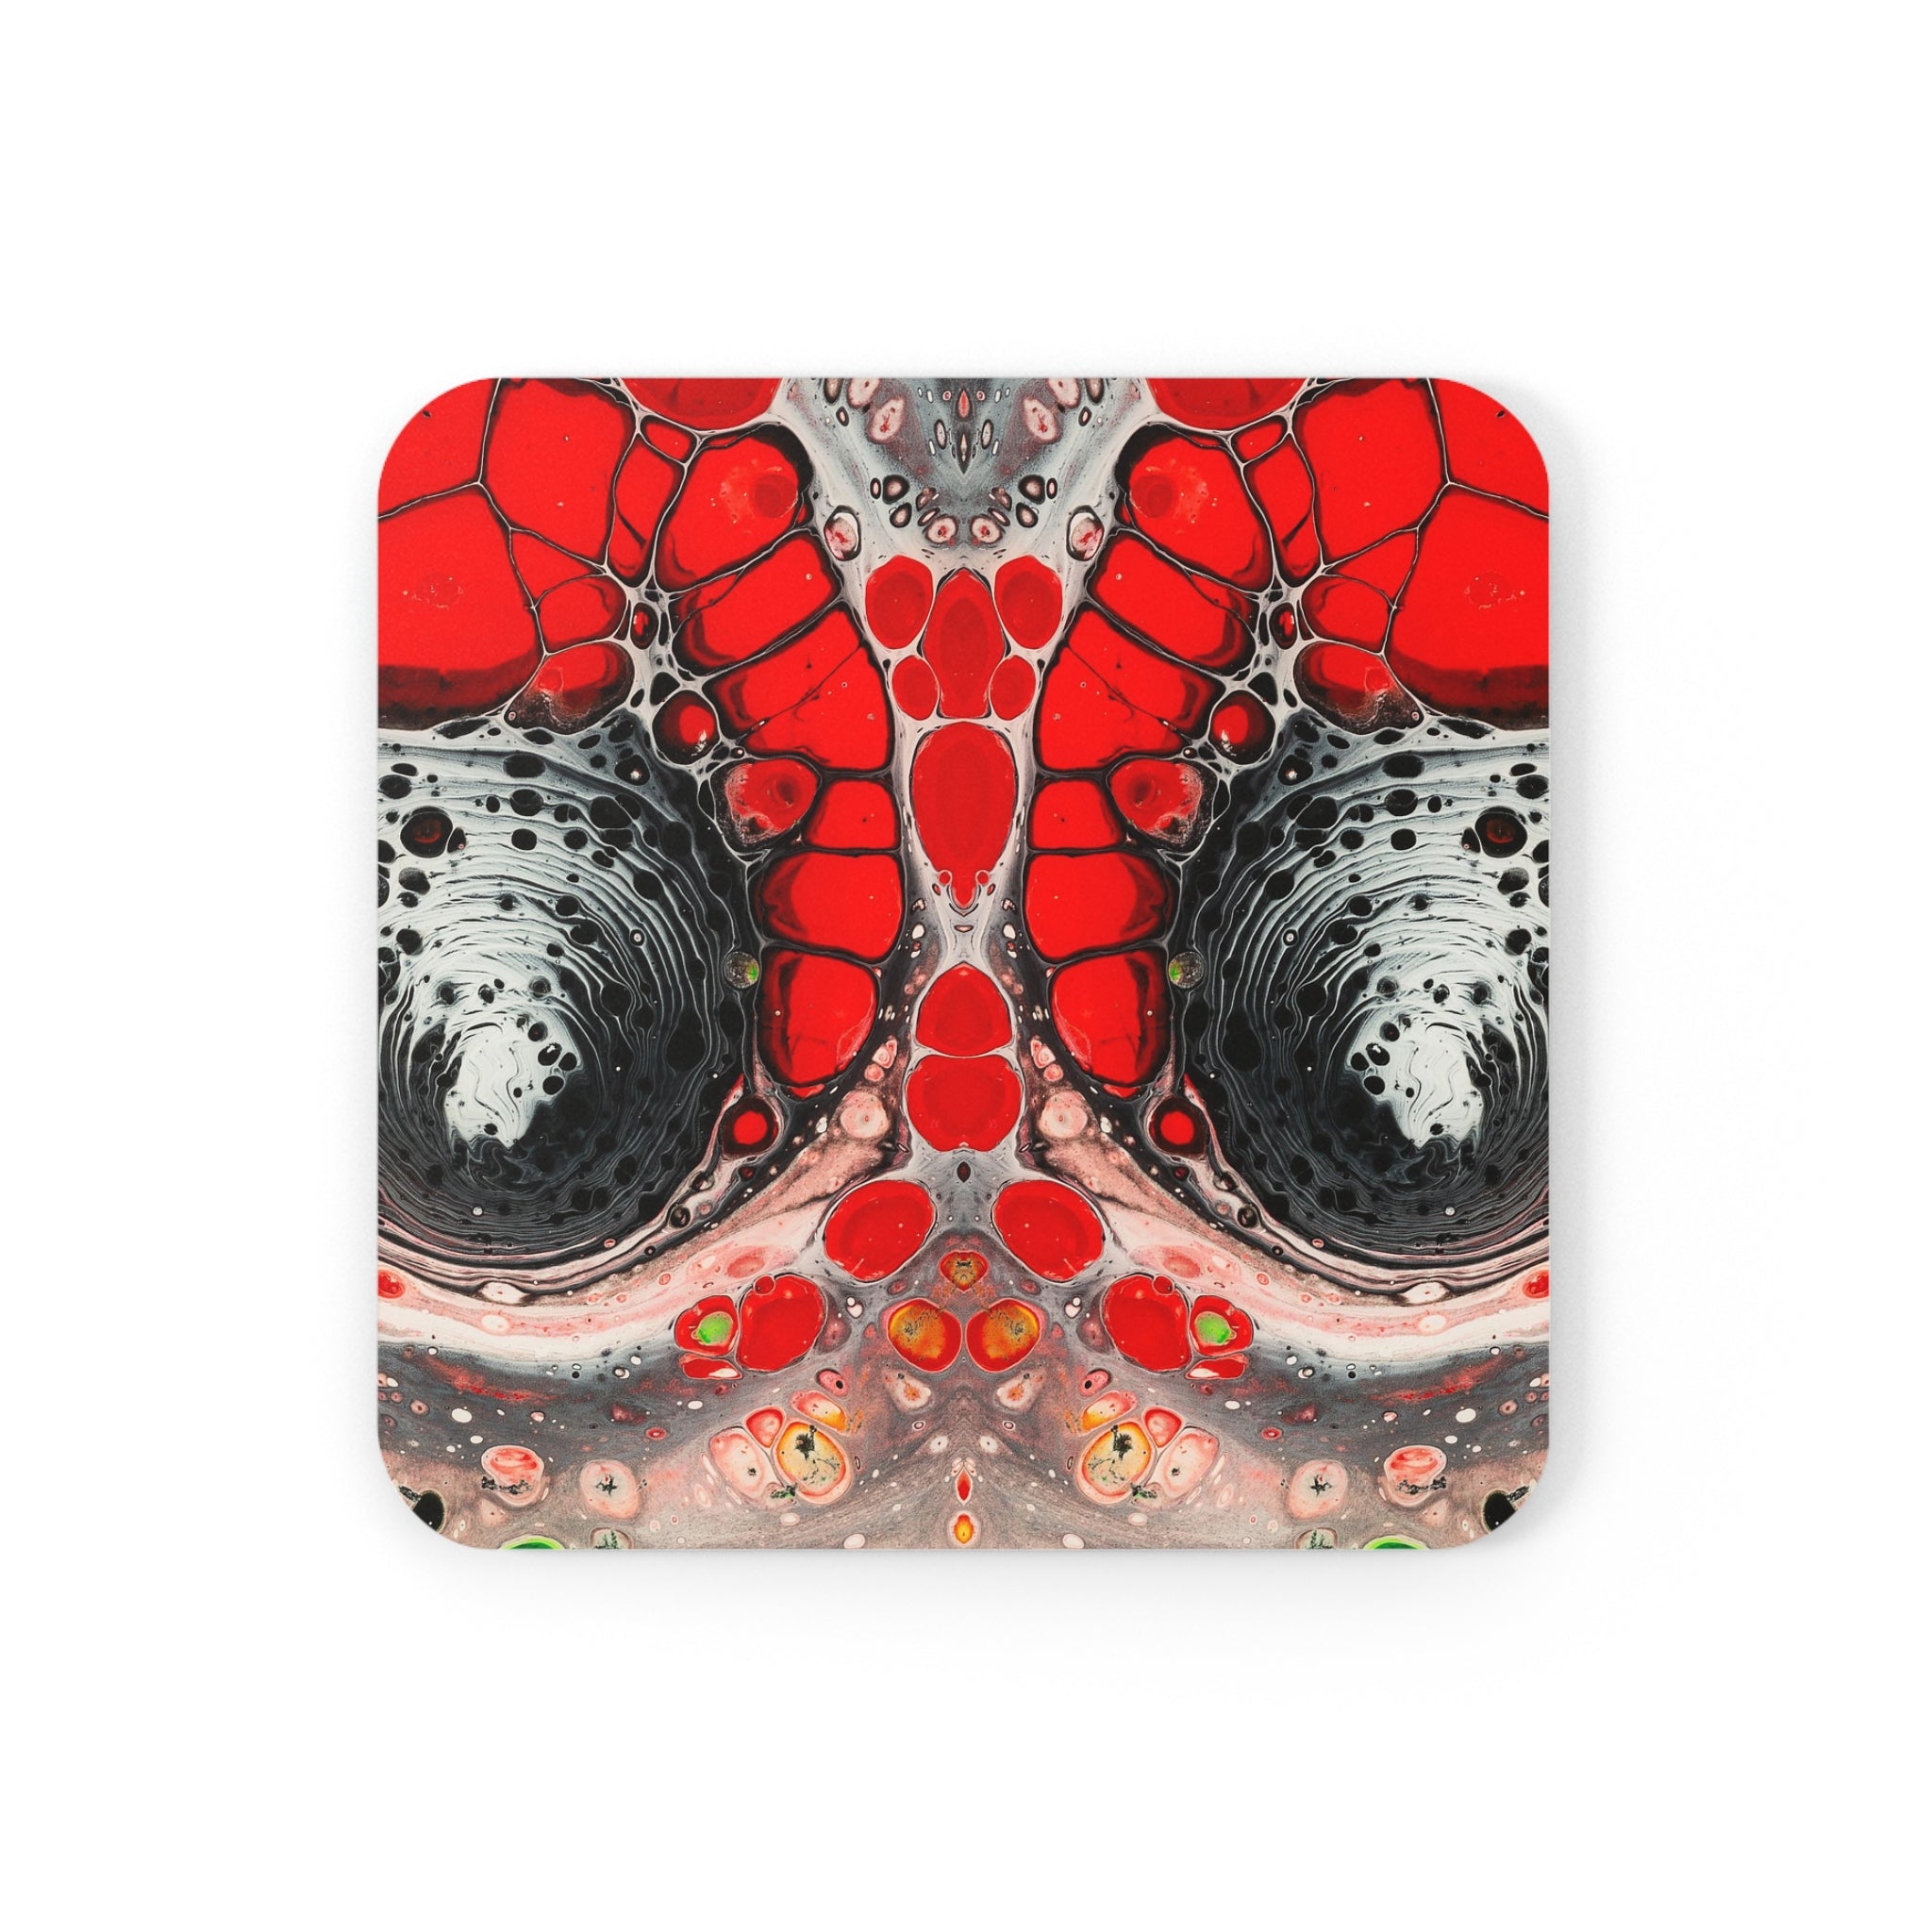 Cameron Creations - Galaxy Funnel - Stylish Coffee Coaster - Square Front